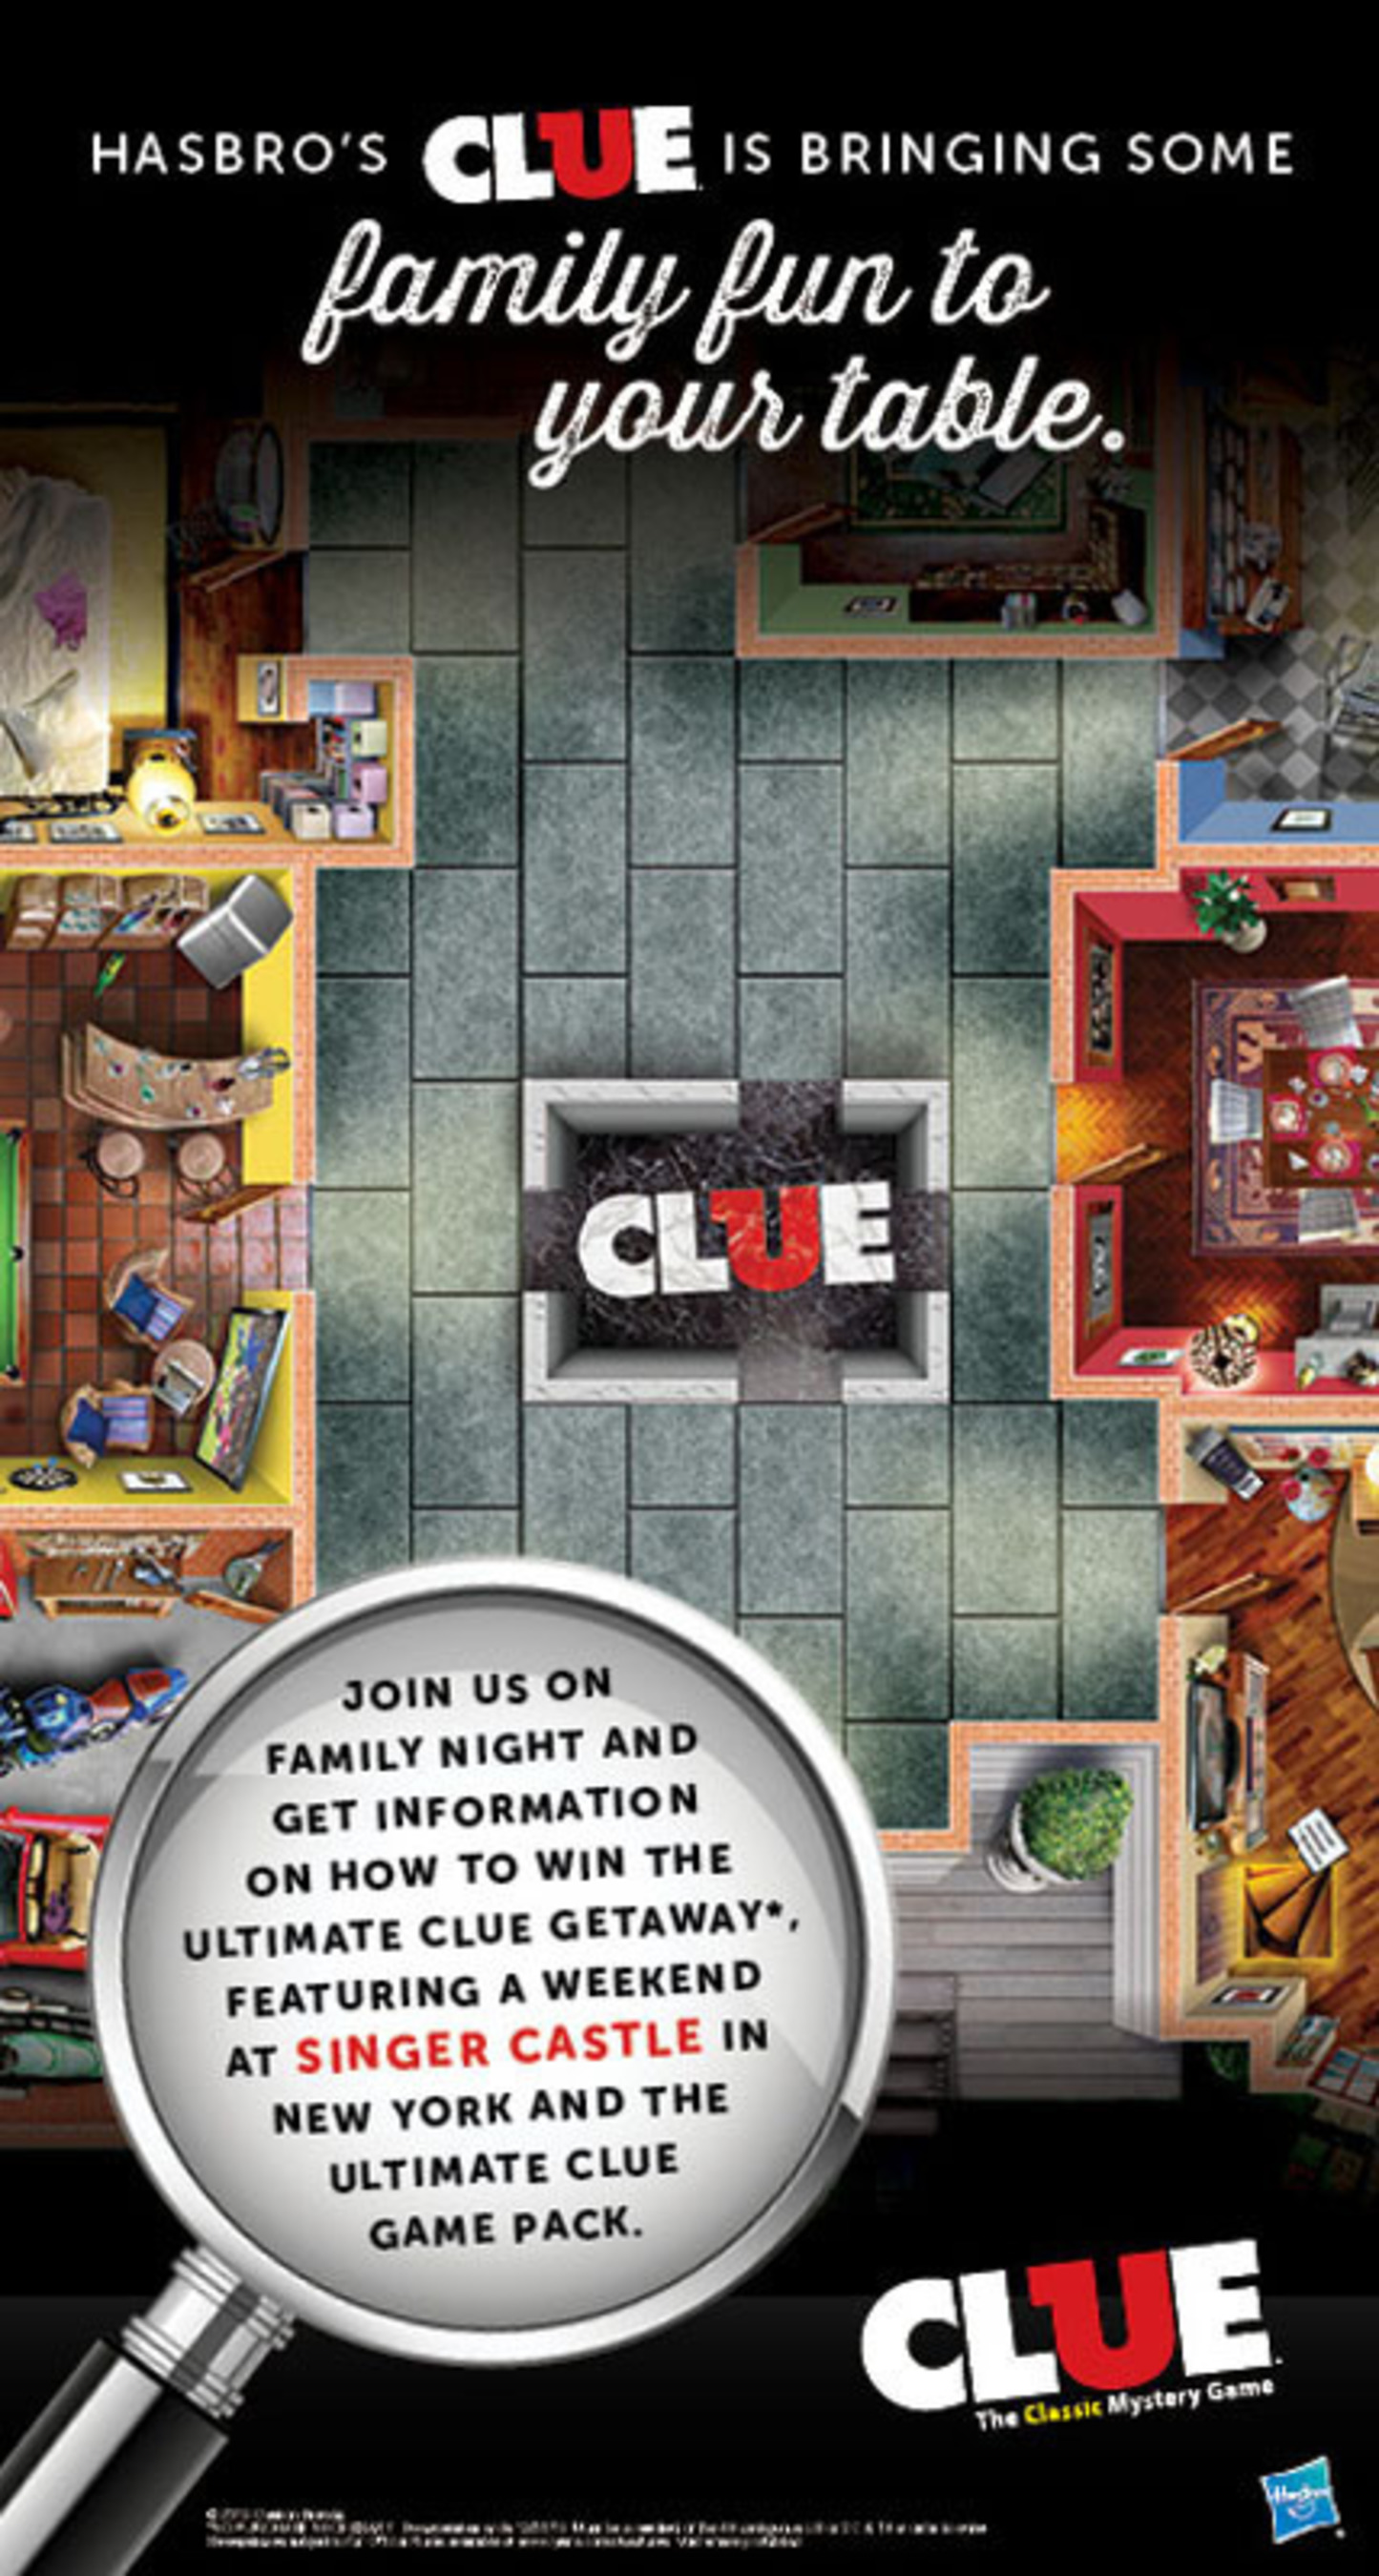 Ryan's, HomeTown Buffet and Old Country Buffet are partnering with Hasbro in December to feature Clue-inspired activities via Thursday Family Night, online games for kids, a trip giveaway to New York and more. For more information, visit www.Ryans.com, www.HomeTownBuffet.com or www.OldCountryBuffet.com. (PRNewsFoto/Ovation Brands) (PRNewsFoto/OVATION BRANDS)